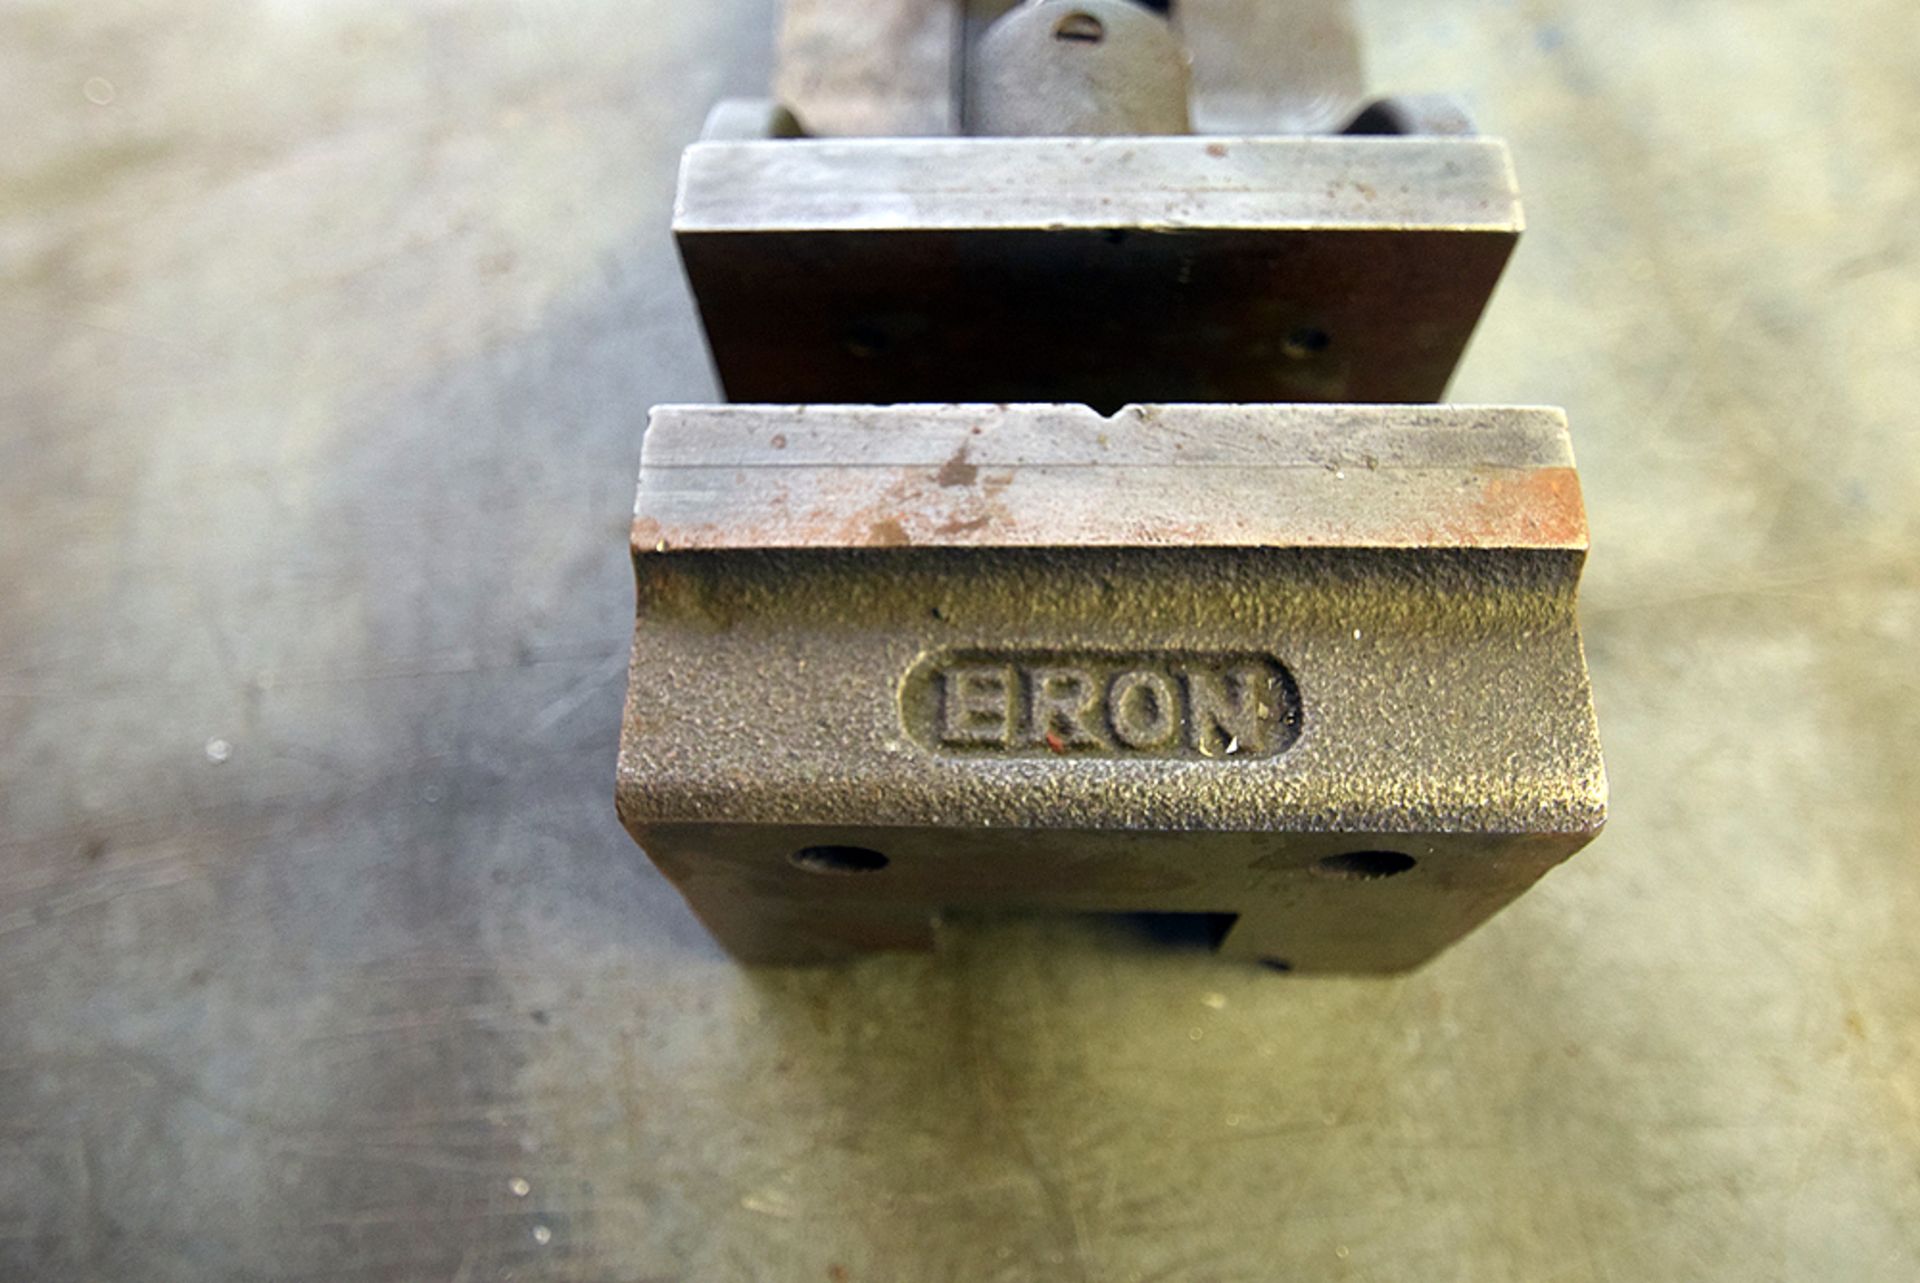 Bron 4" Drill Vise - Image 2 of 2